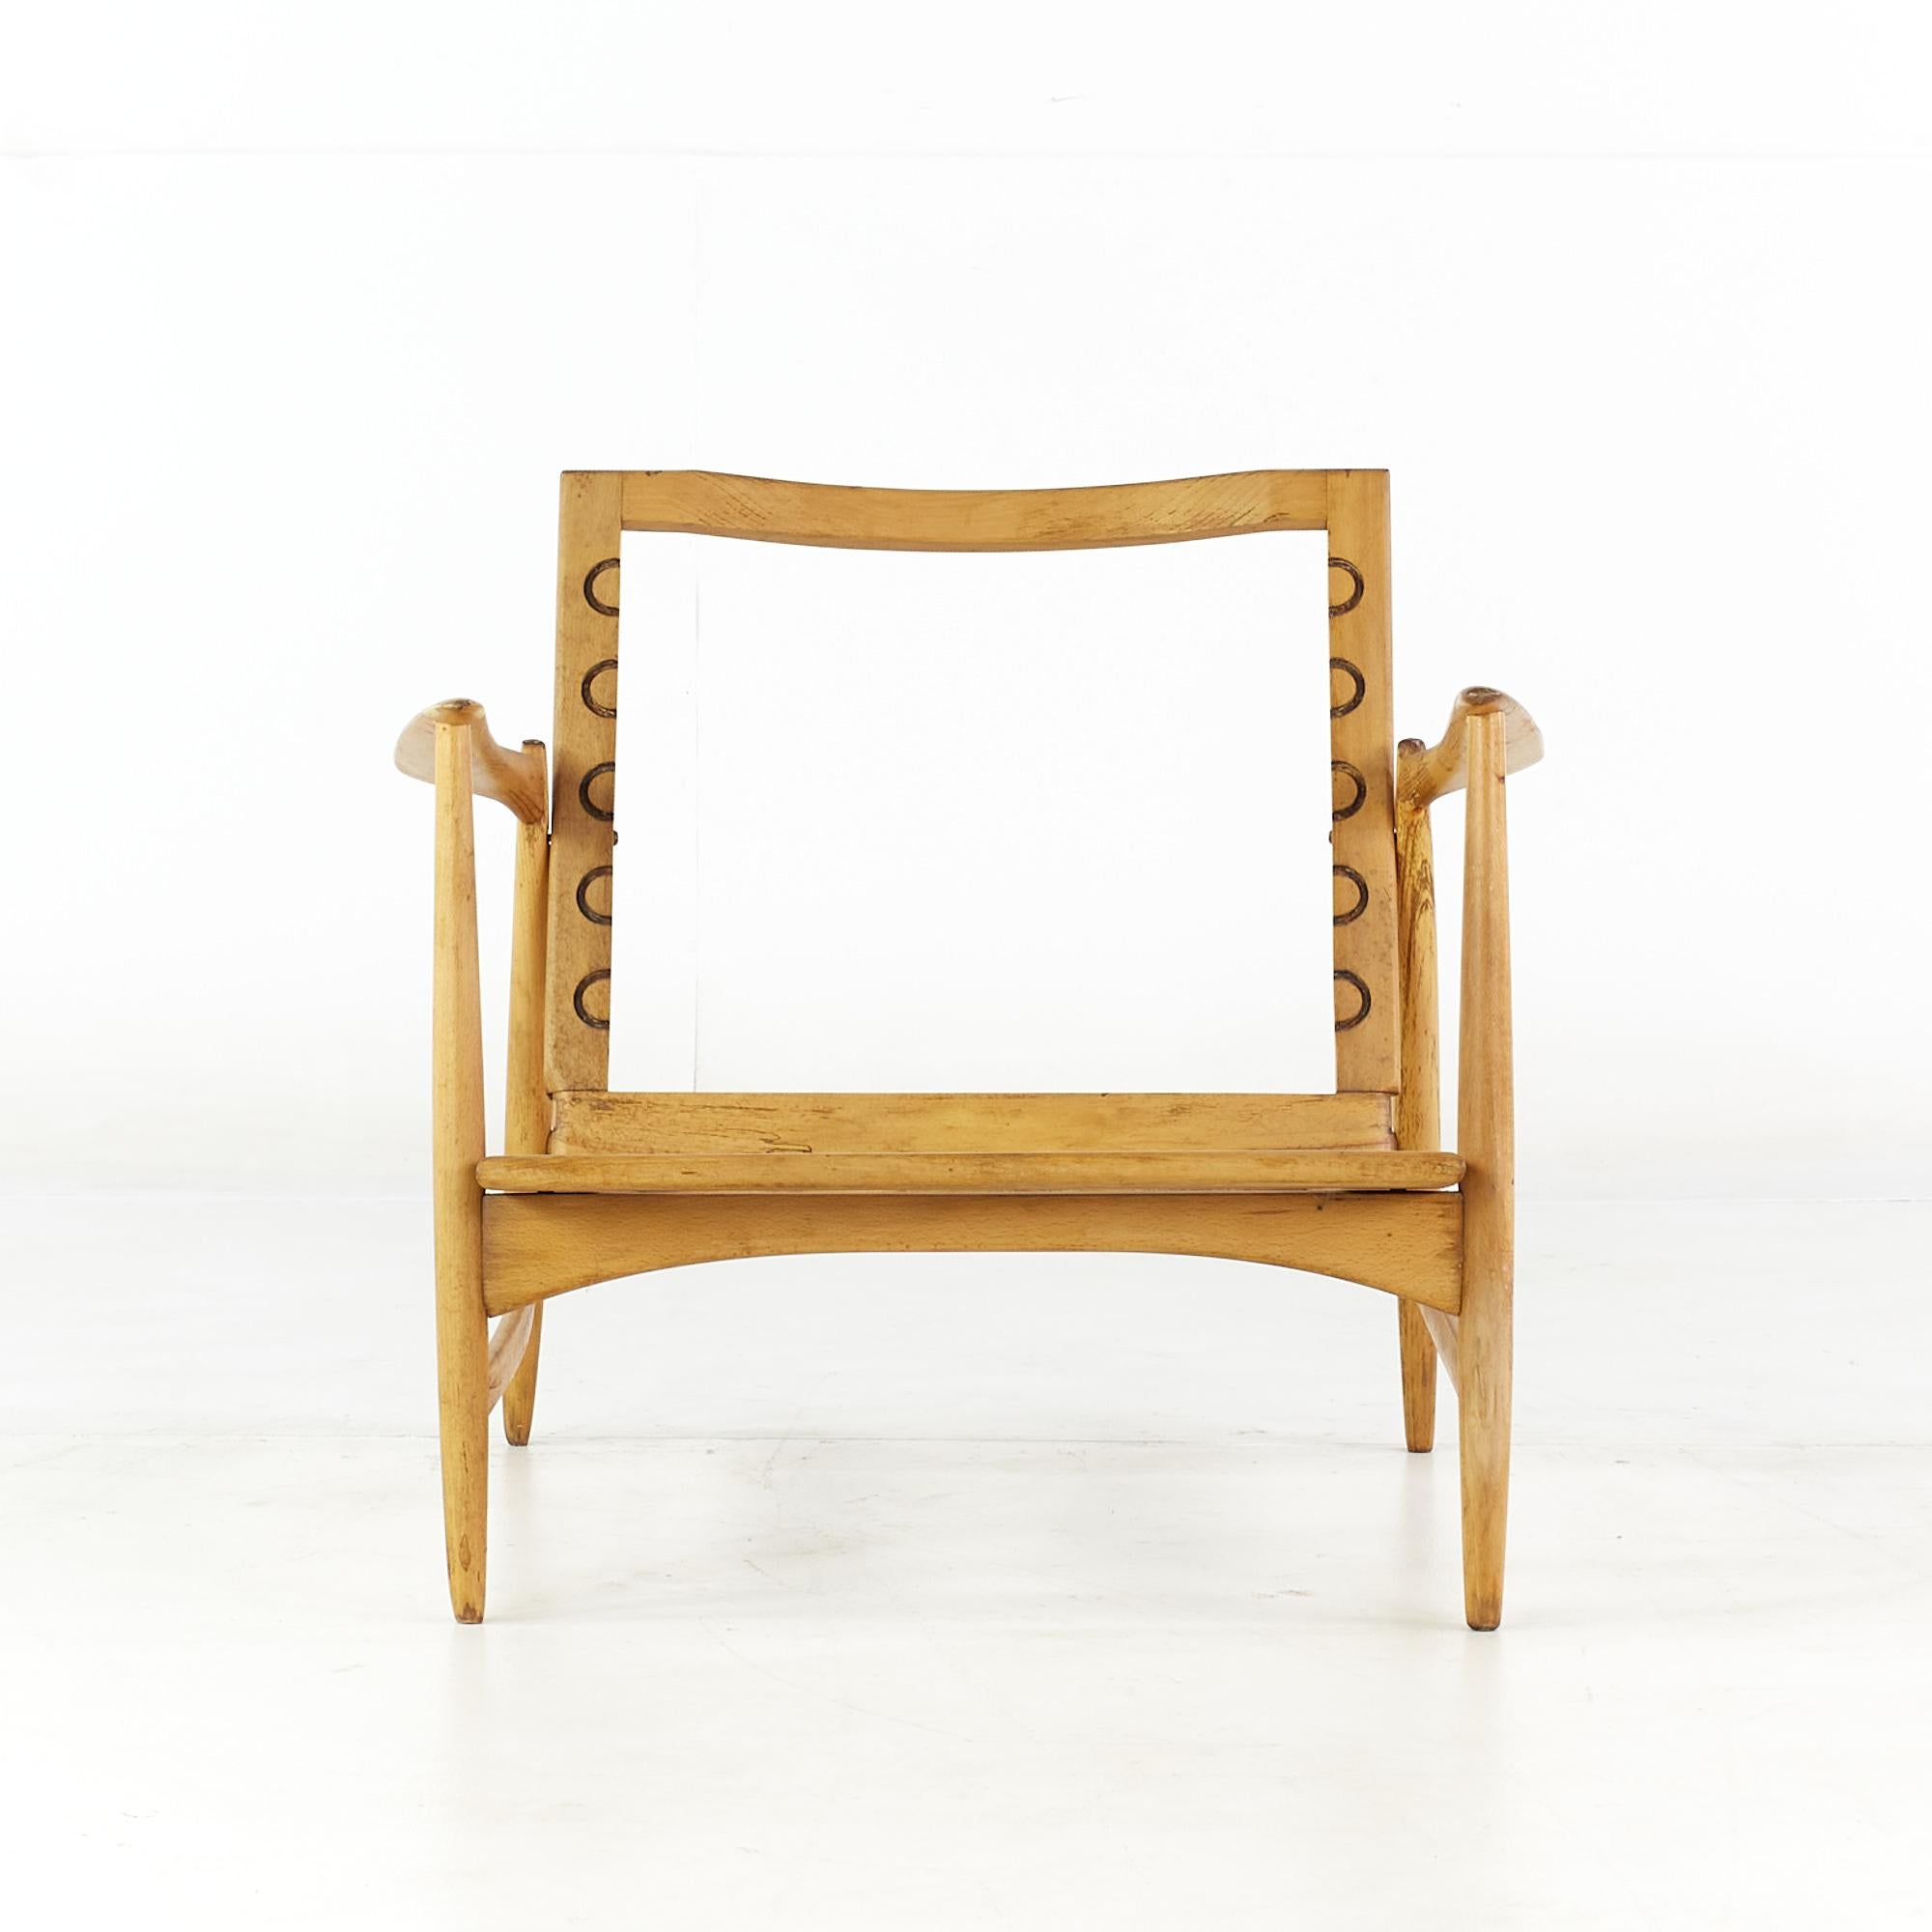 Kofod Larsen mid century danish walnut lounge chair frame

This chair measures: 30 wide x 33 deep x 26.5 high, with a seat height of 12 and arm height/chair clearance 22.5 inches
(The seat height measurement will increase once cushions are